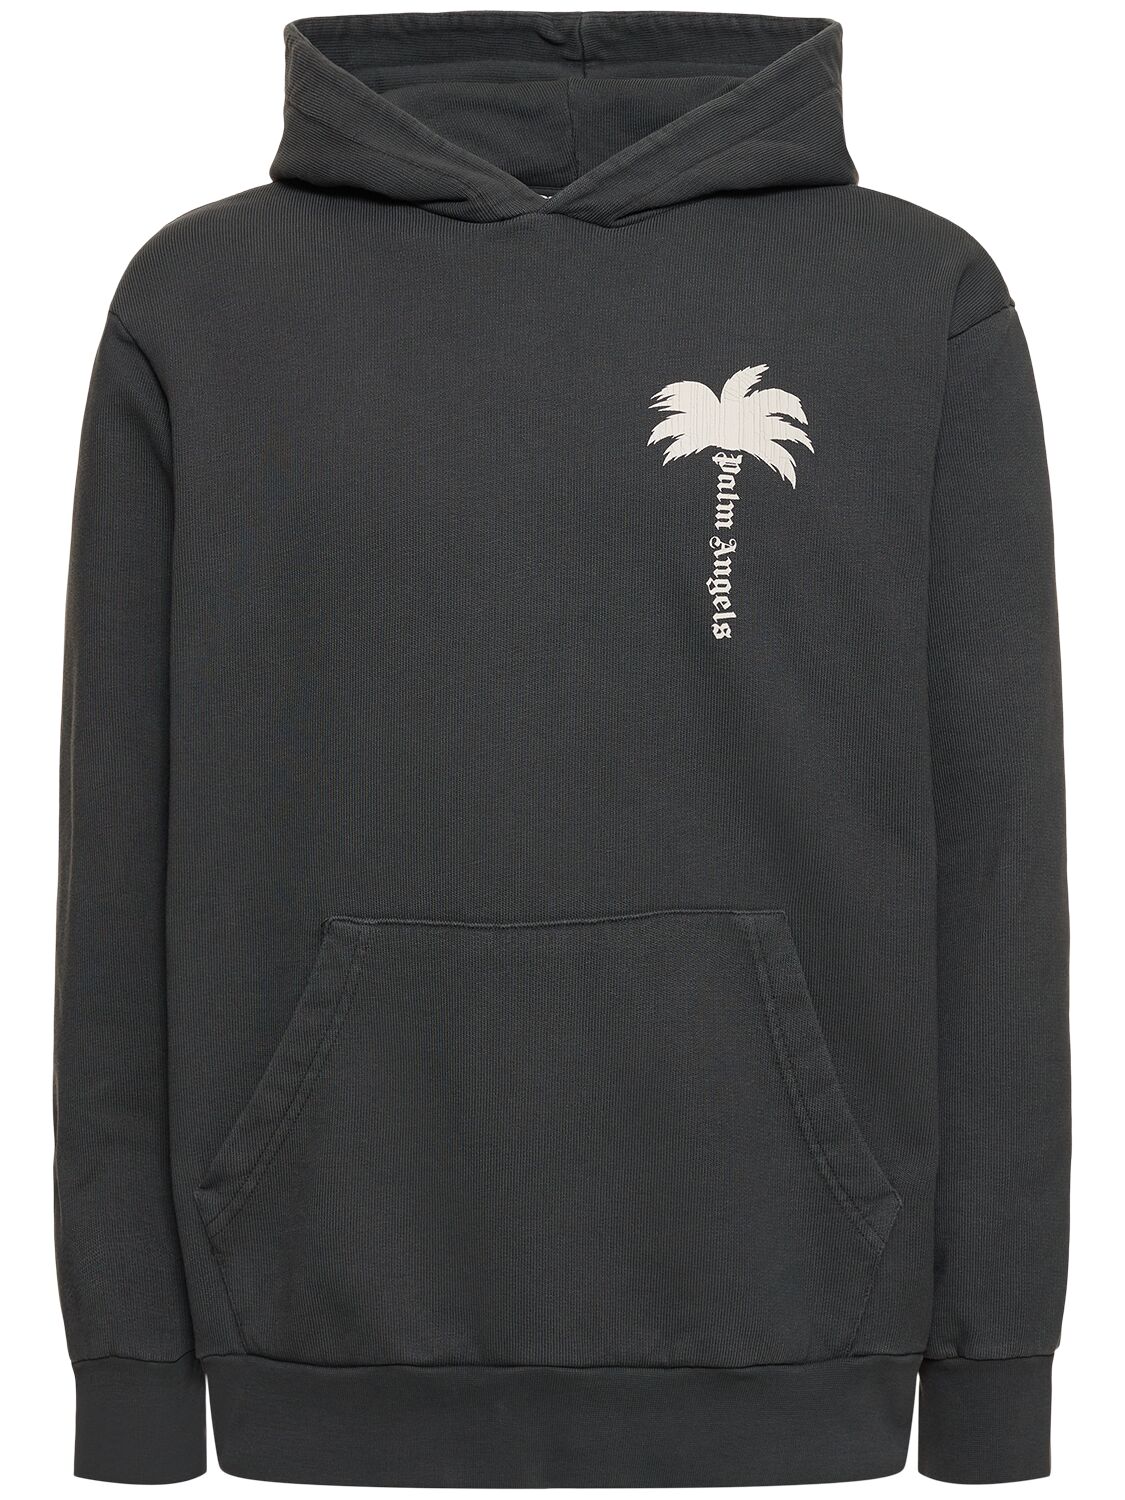 The Palm Cotton Hoodie